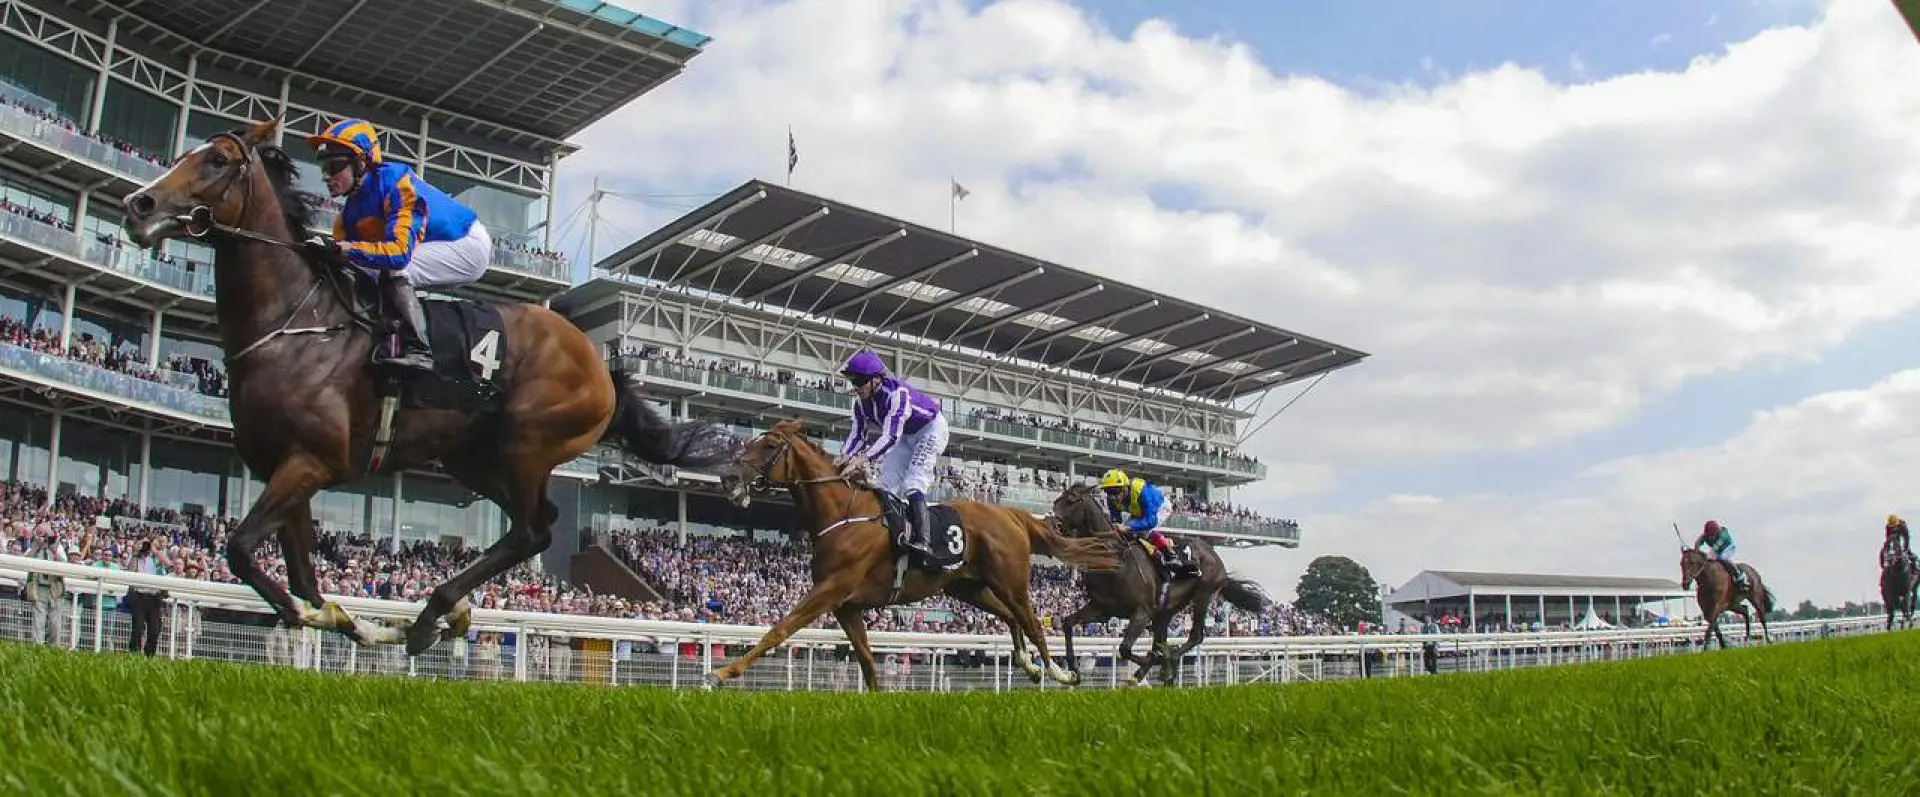 Idaho odds lead St Leger 2016 tips as the Doncaster Classic takes centre stage on September 10th.